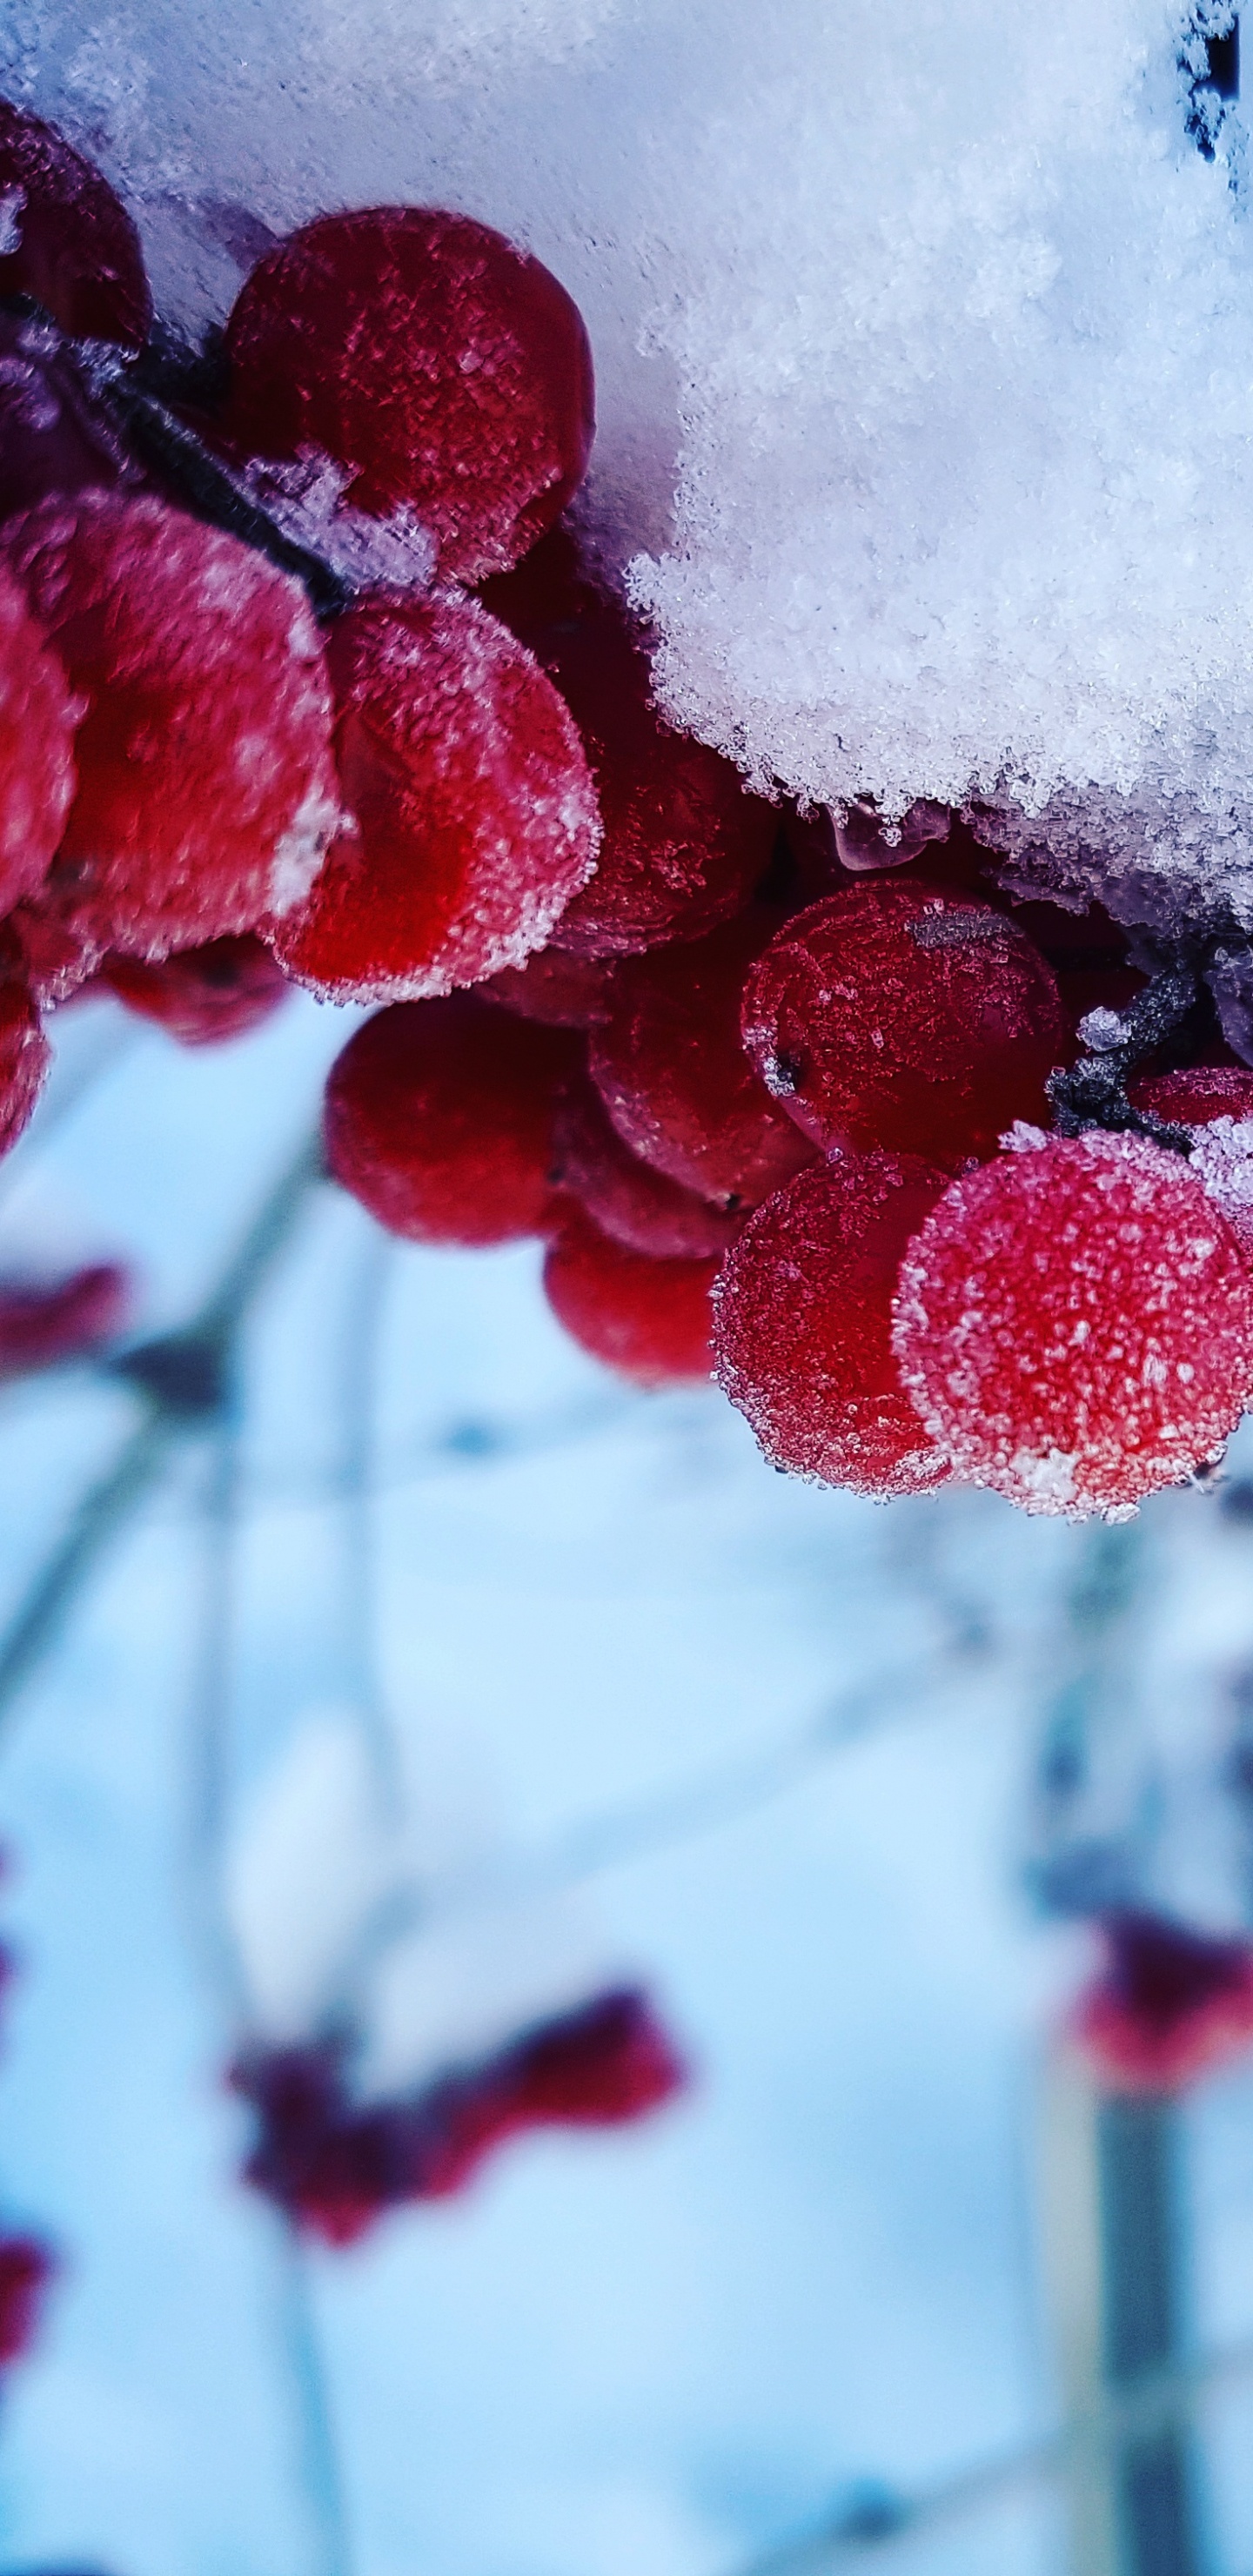 Red Round Fruits Covered With Snow. Wallpaper in 1440x2960 Resolution